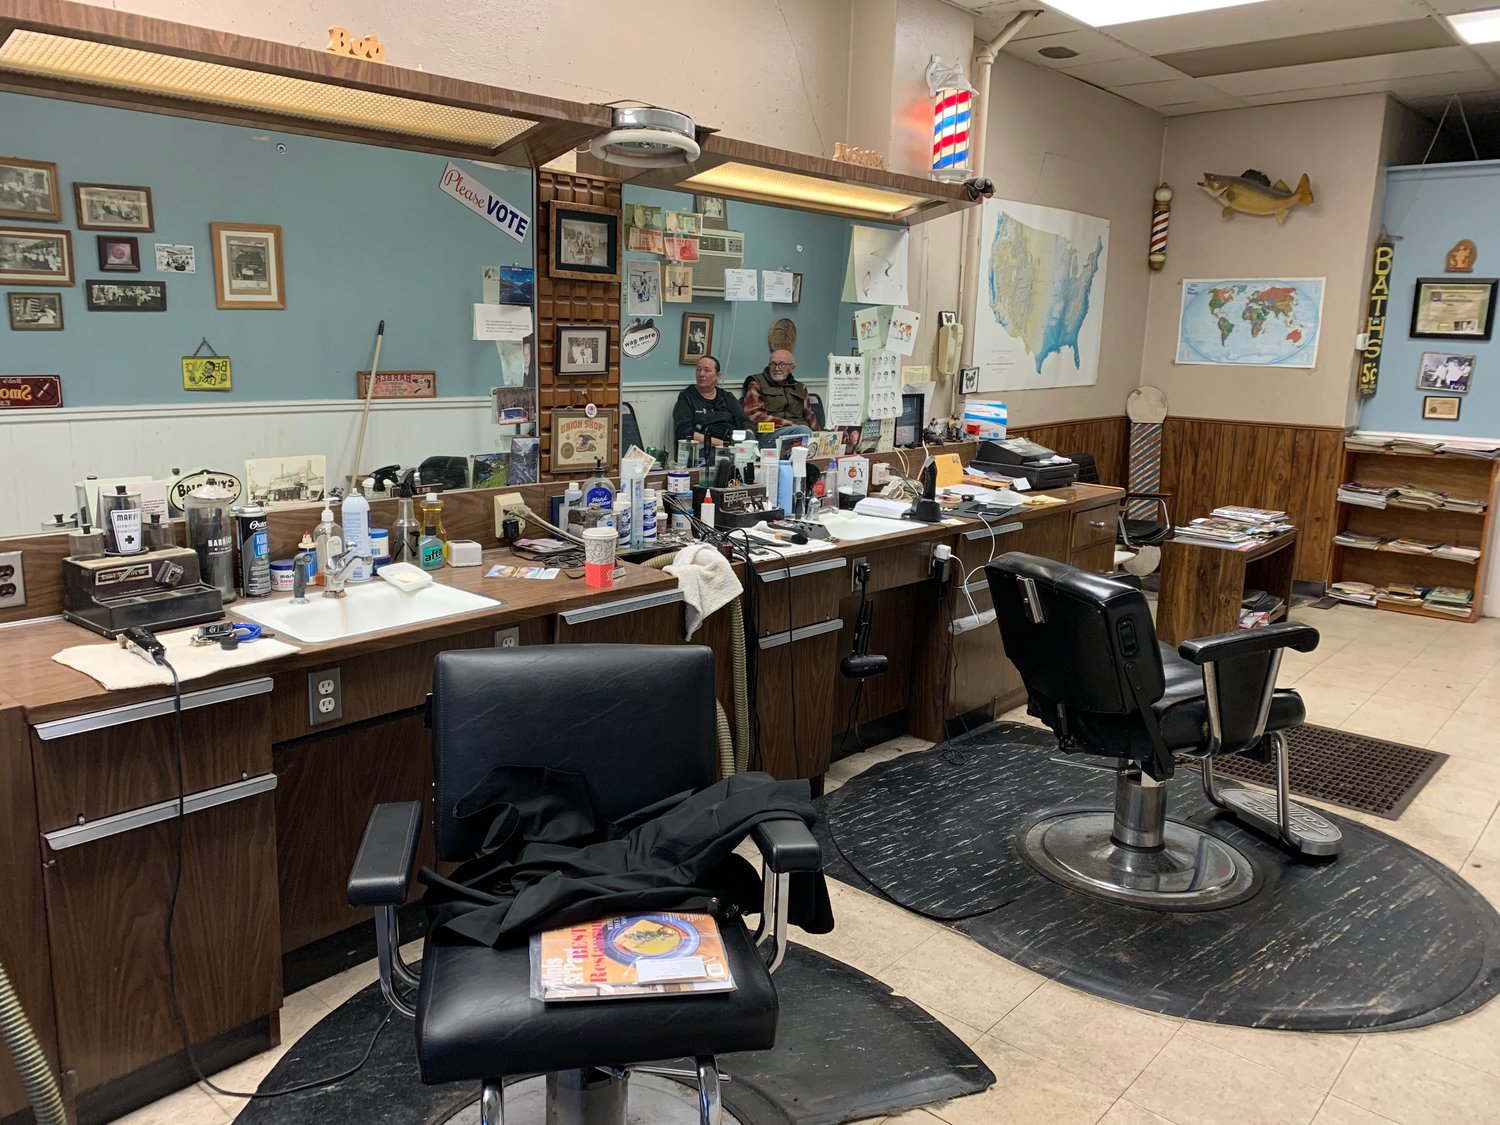 Barbers Bob Ohnstad and daughter Kristin Ohnstad are reflected in the mirror of the barbershop they’ve operated since 1993.